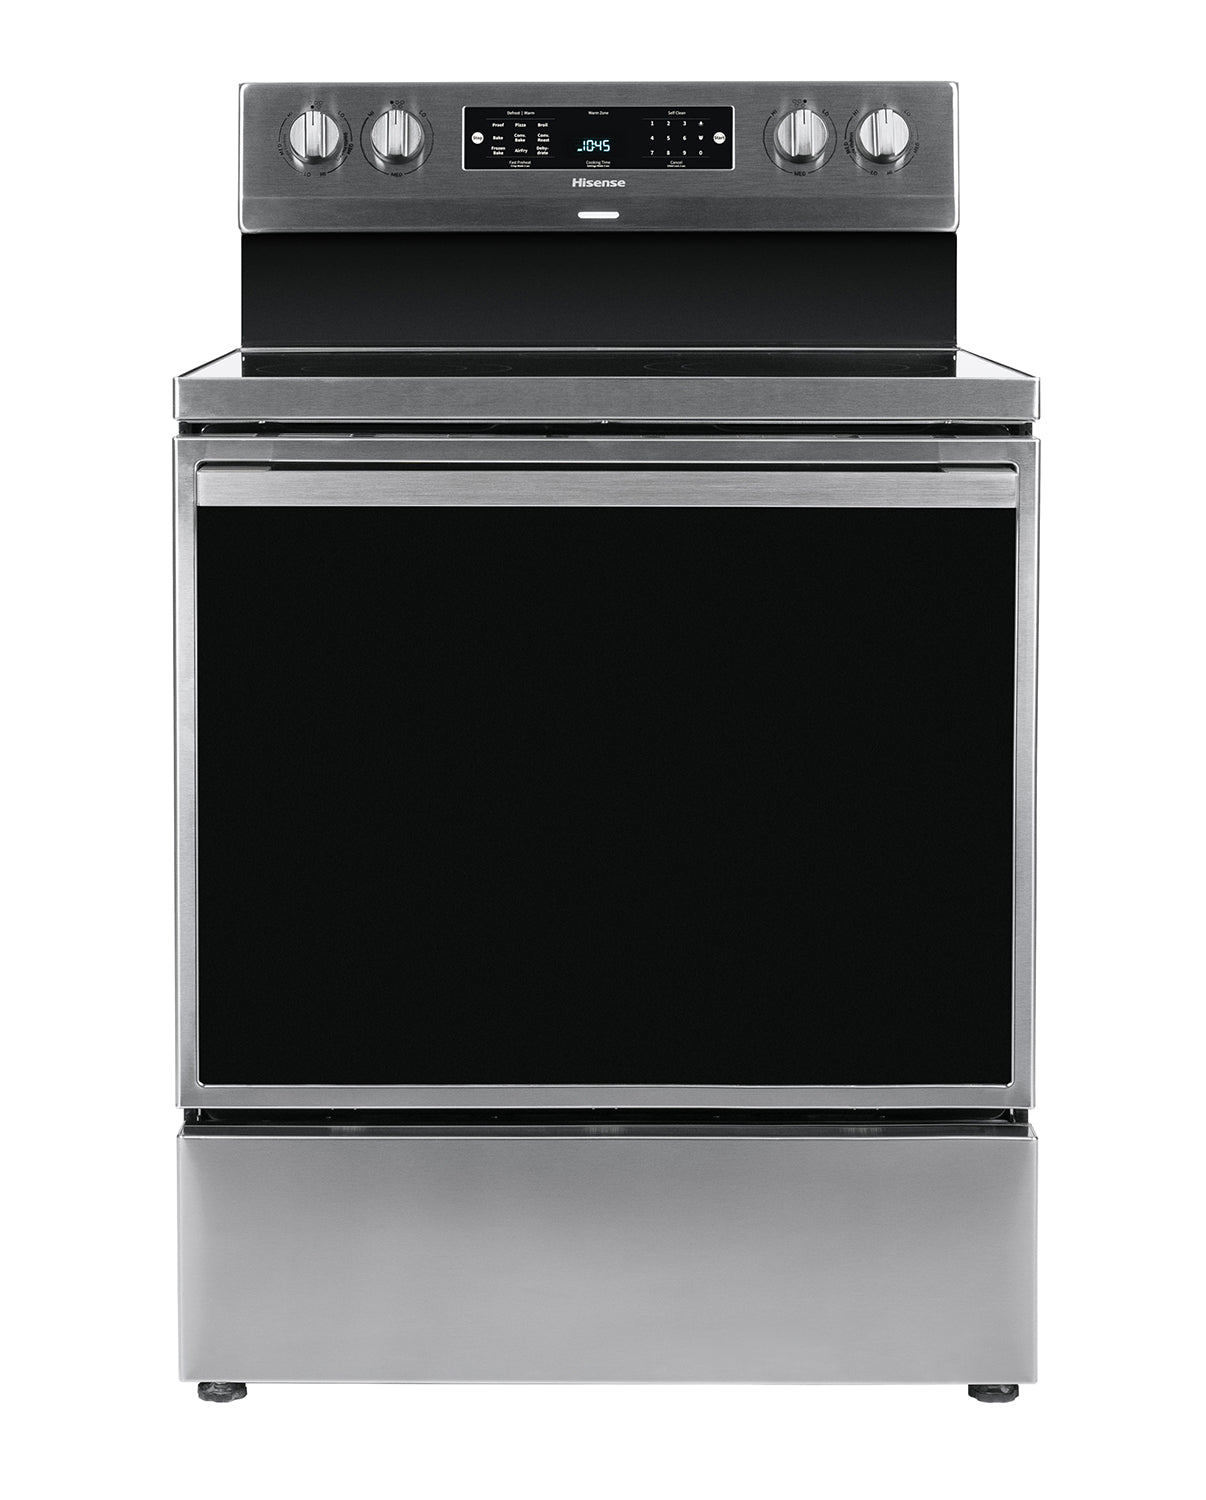 Hisense - 5.8 cu. ft  Electric Range in Stainless - HBE3501CPS